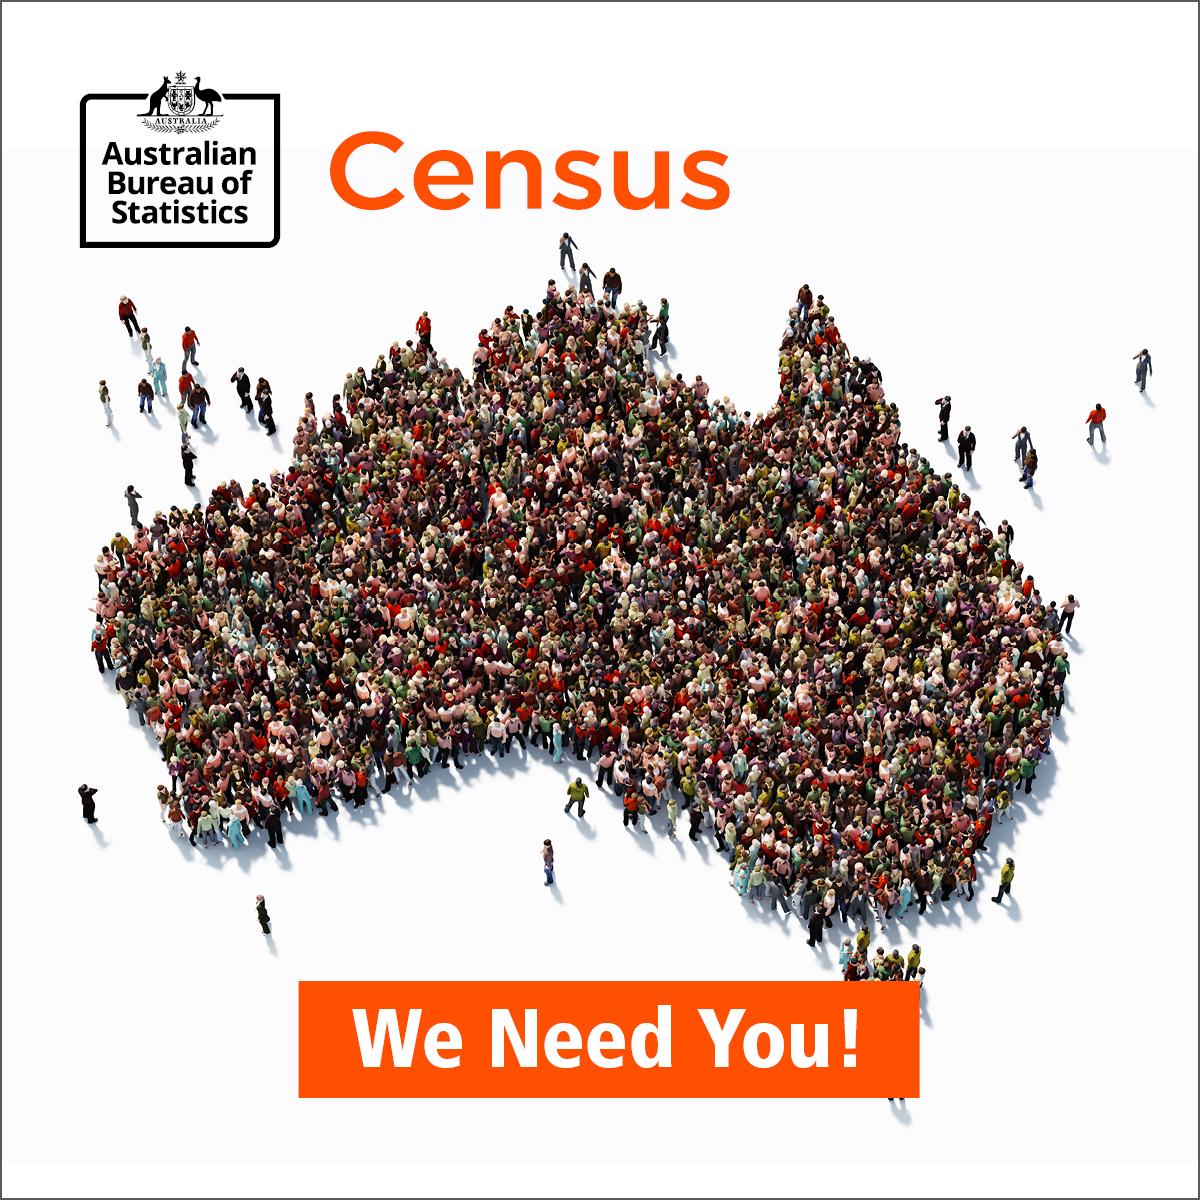 Australian Bureau of Statistics on Twitter: "The Census helps inform  services for people and communities around the country. The ABS invites  organisations using Census data to share their stories. Visit  https://t.co/Z8d4tEoij2 to